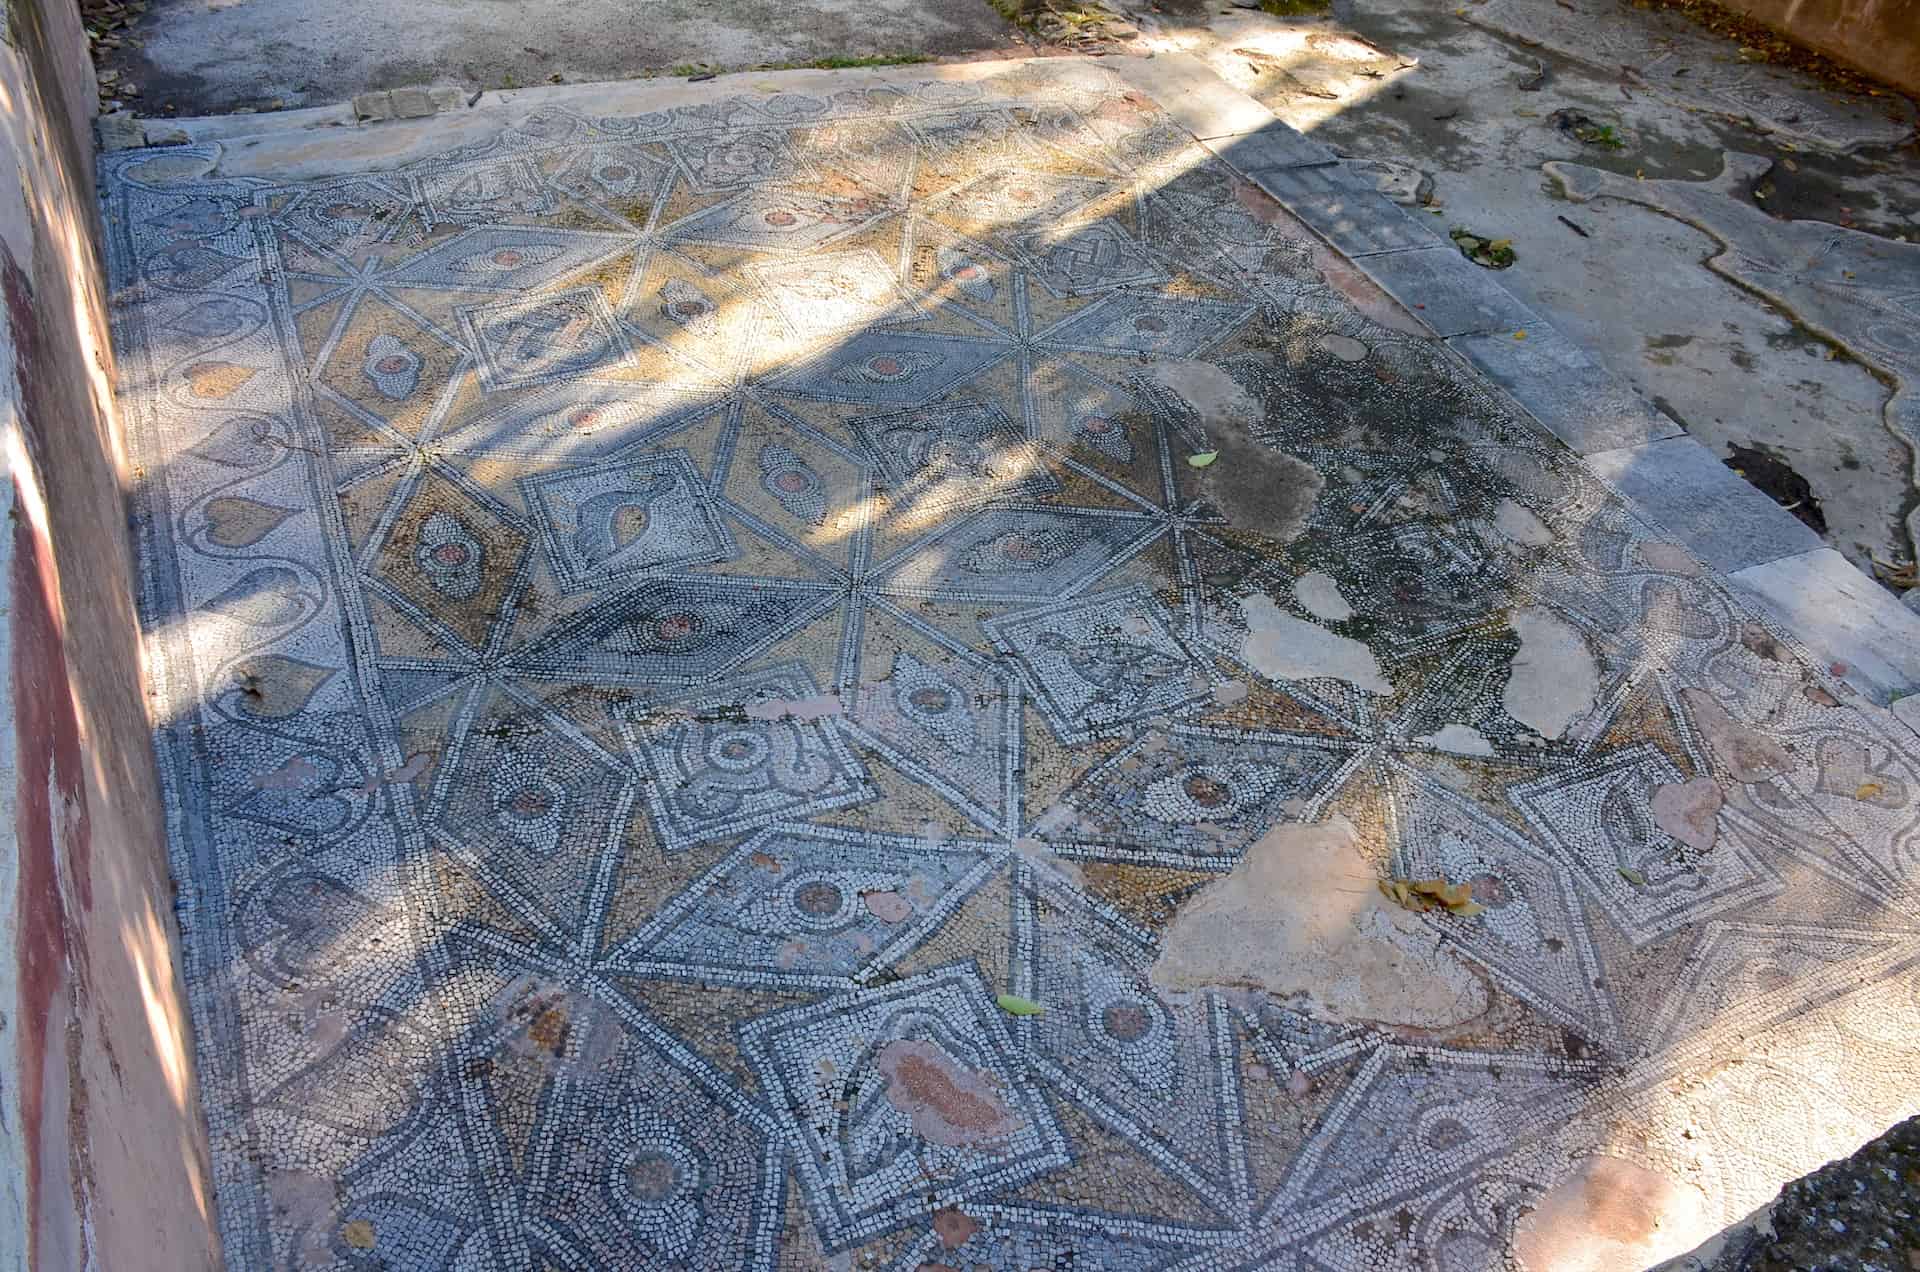 Roman mosaic at the National Garden in Athens, Greece